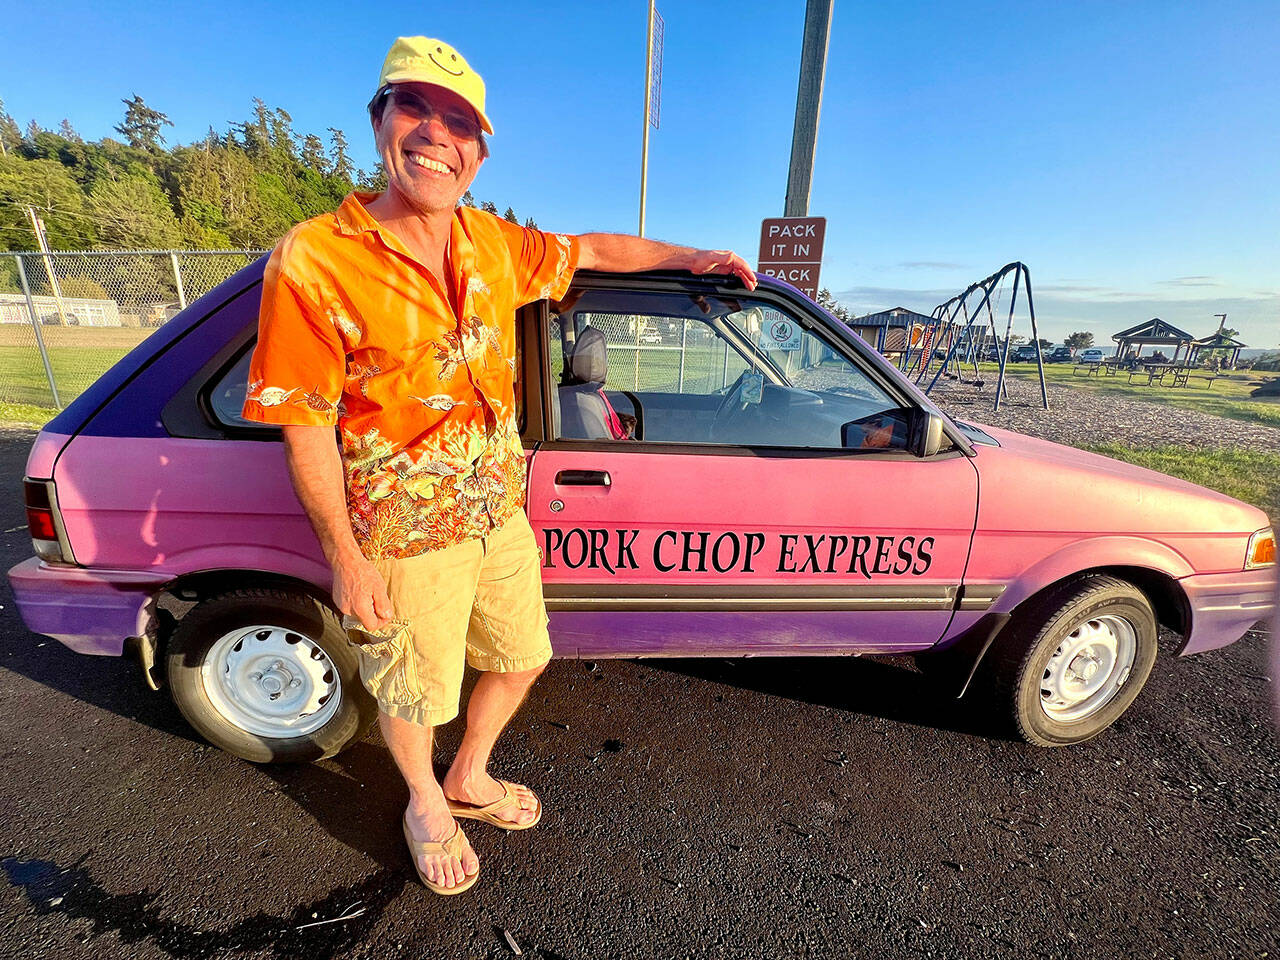 Dave “Bronco” Erickson stands next to the pink-and-purple 1991 Subaru Justy hatchback “Pork Chop Express” car that he is seeking to re-home for $500. The car nicknamed “Porky” has been on Whidbey Island for years, often as yard art. (Andrea Brown / The Herald)